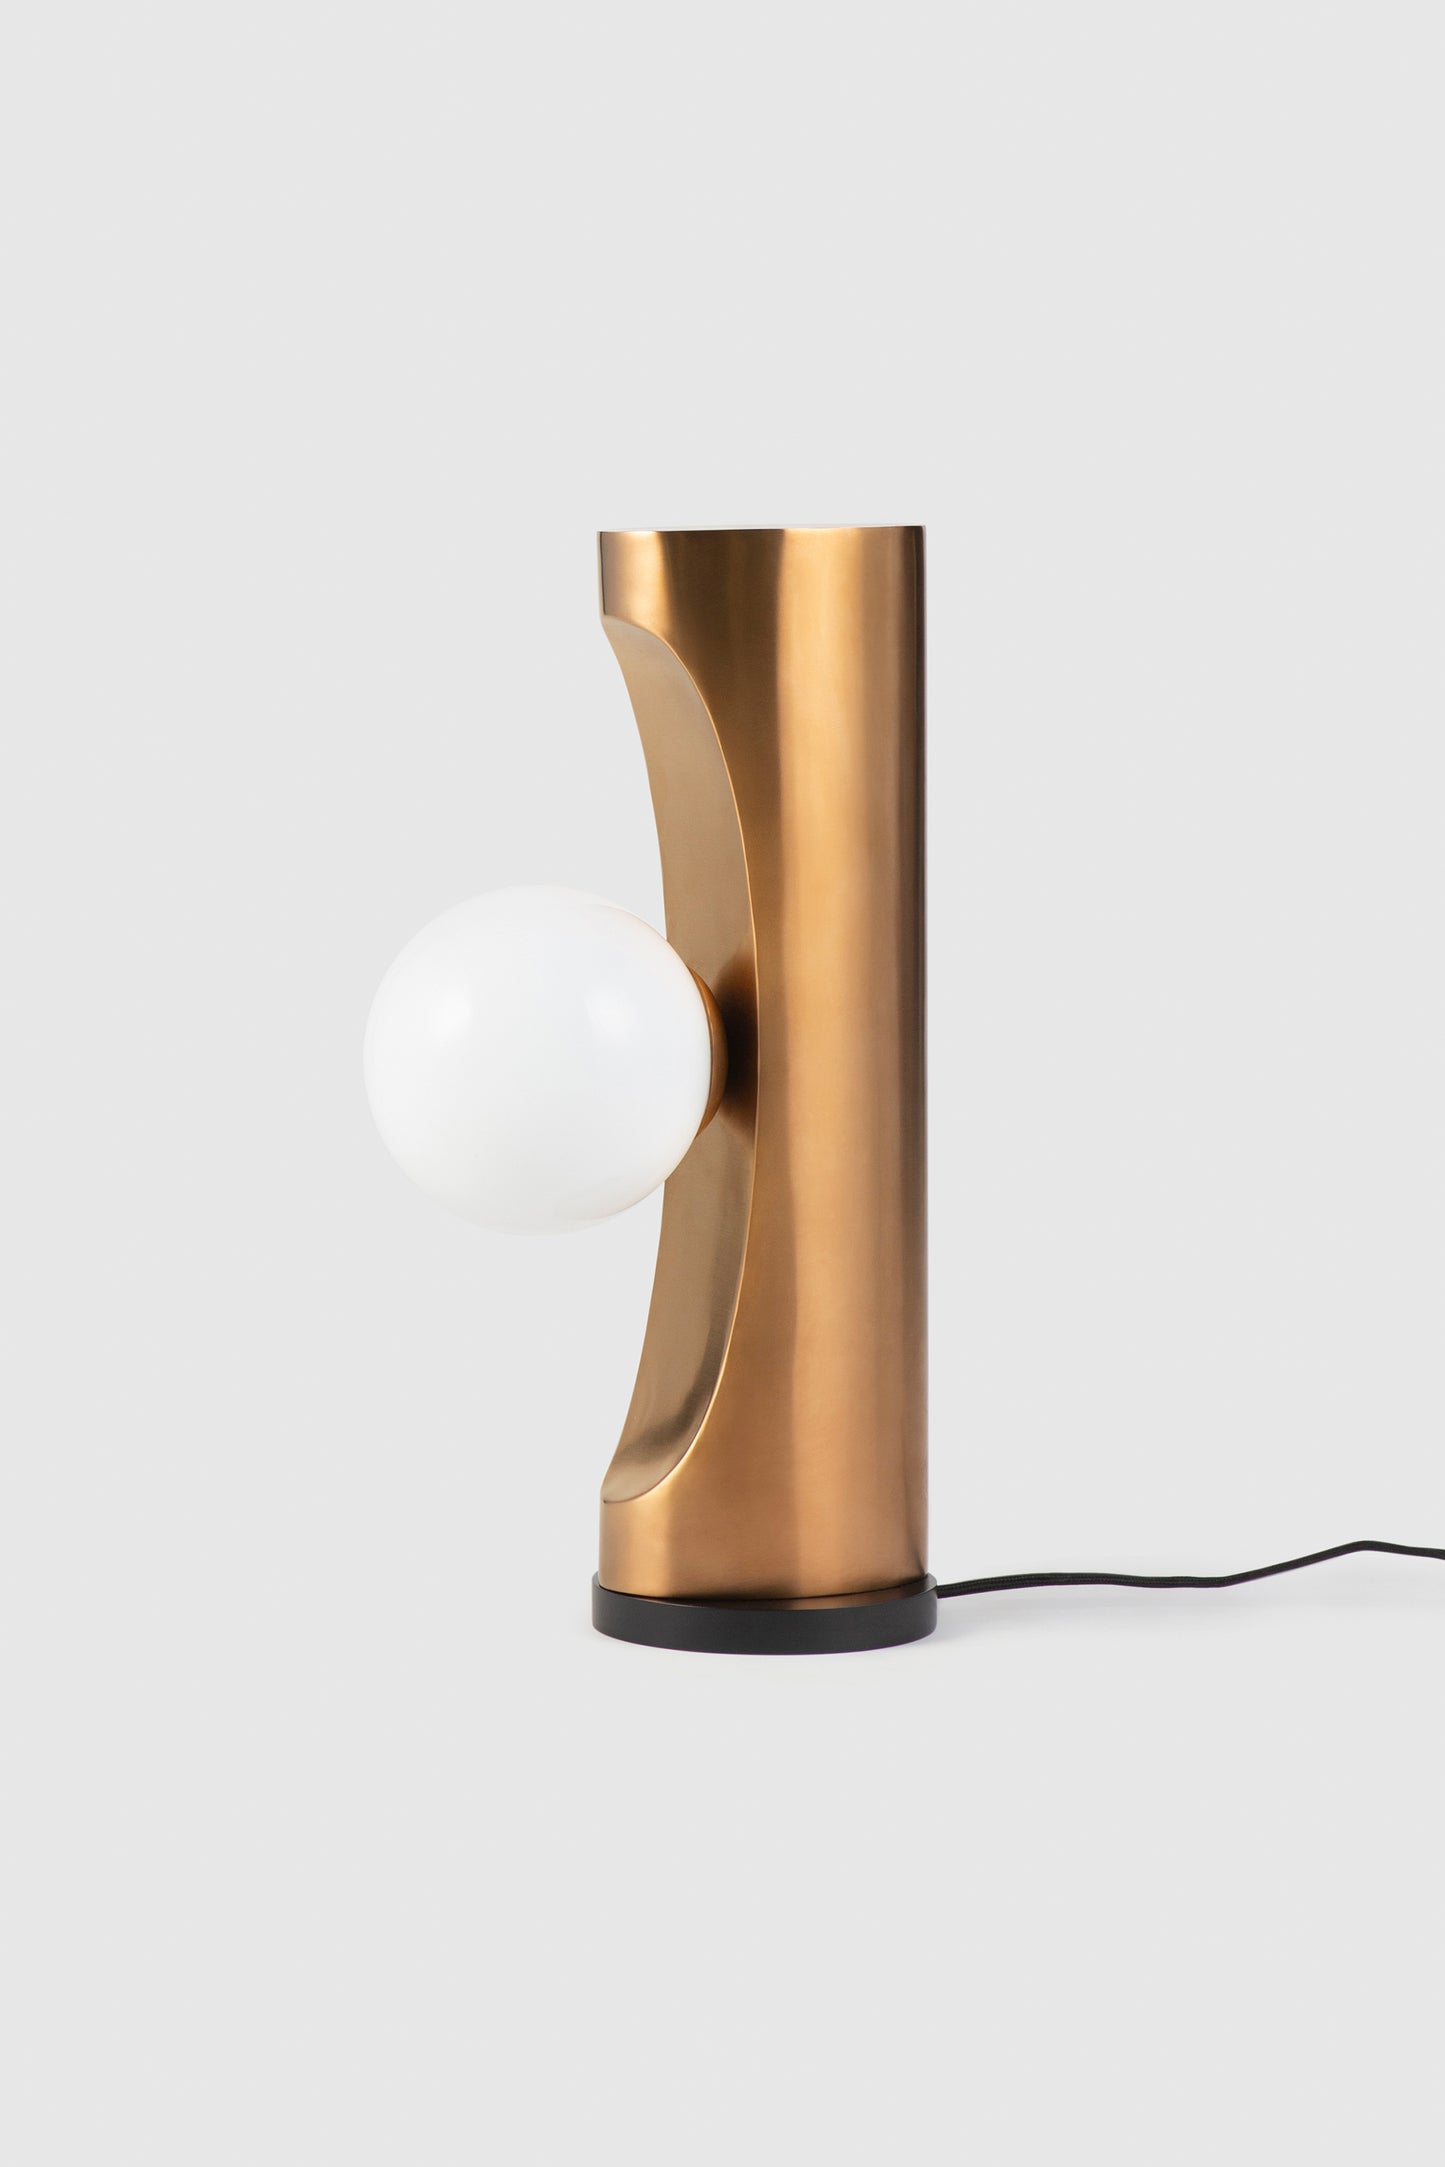 Notch Table Lamp